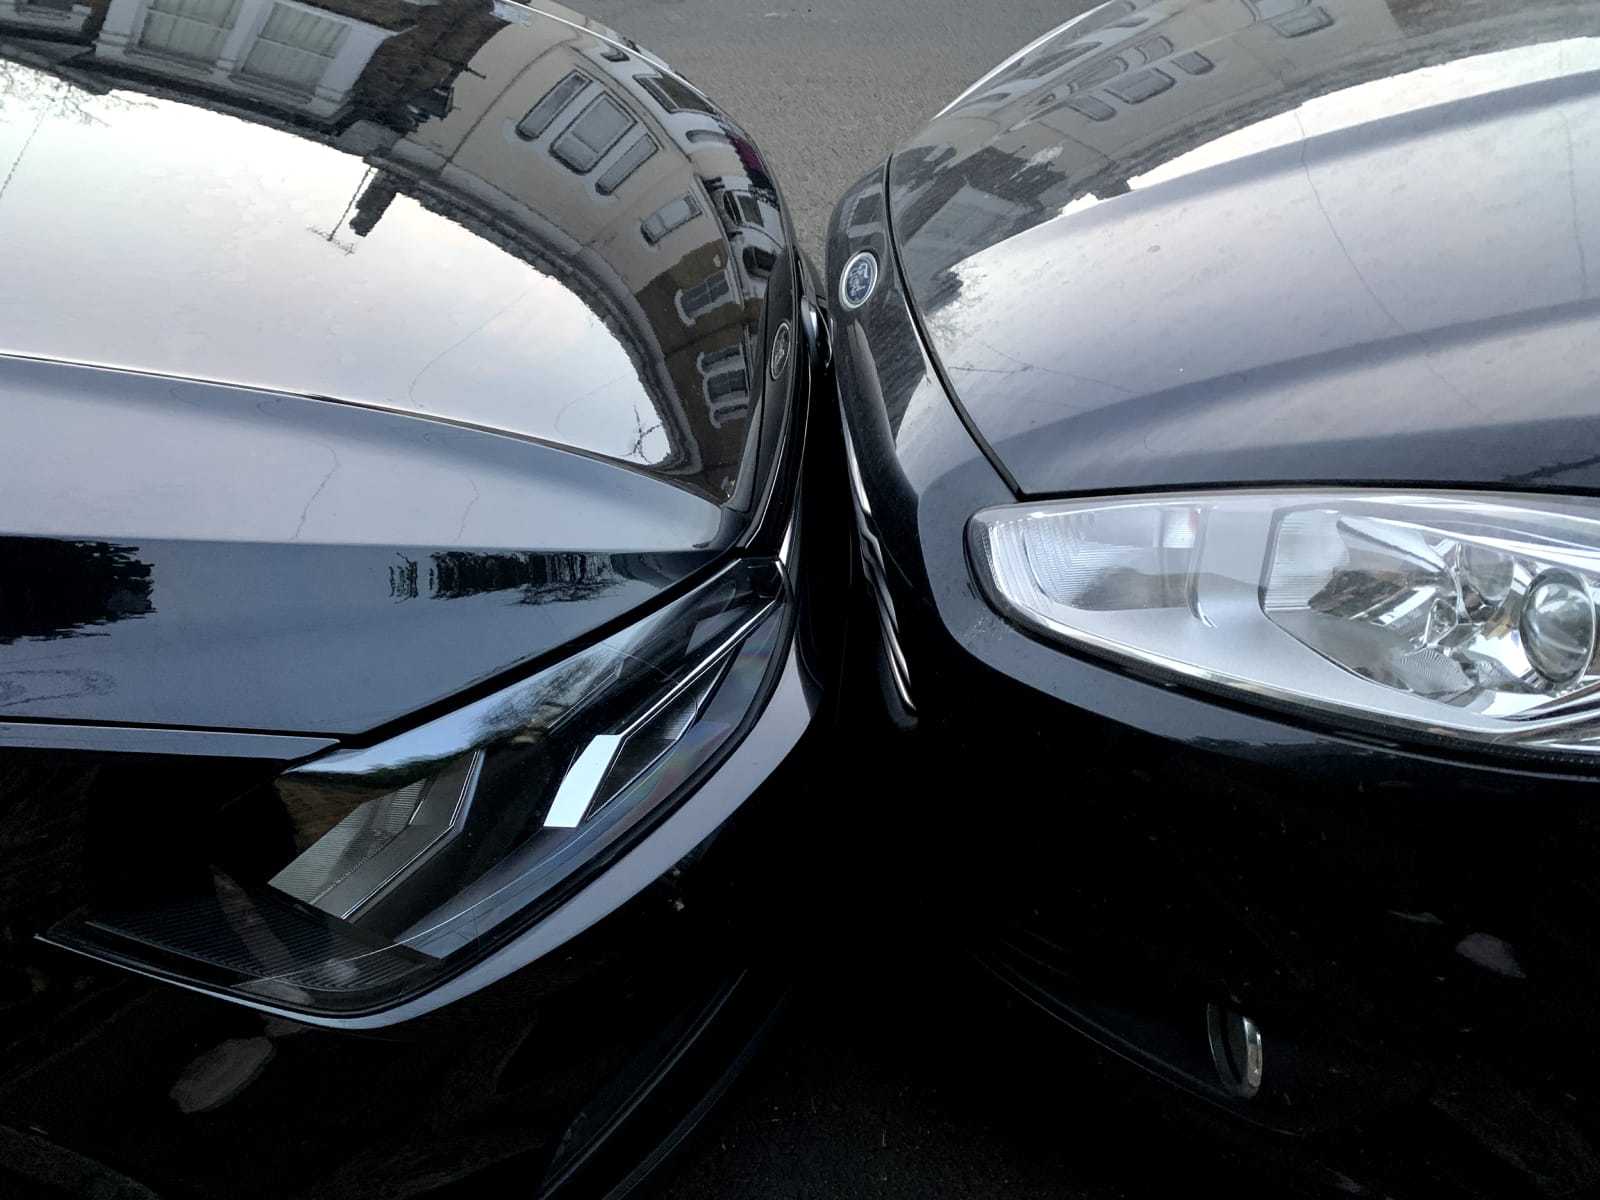 Two black cars parked so close together that their front bumpers are kissing